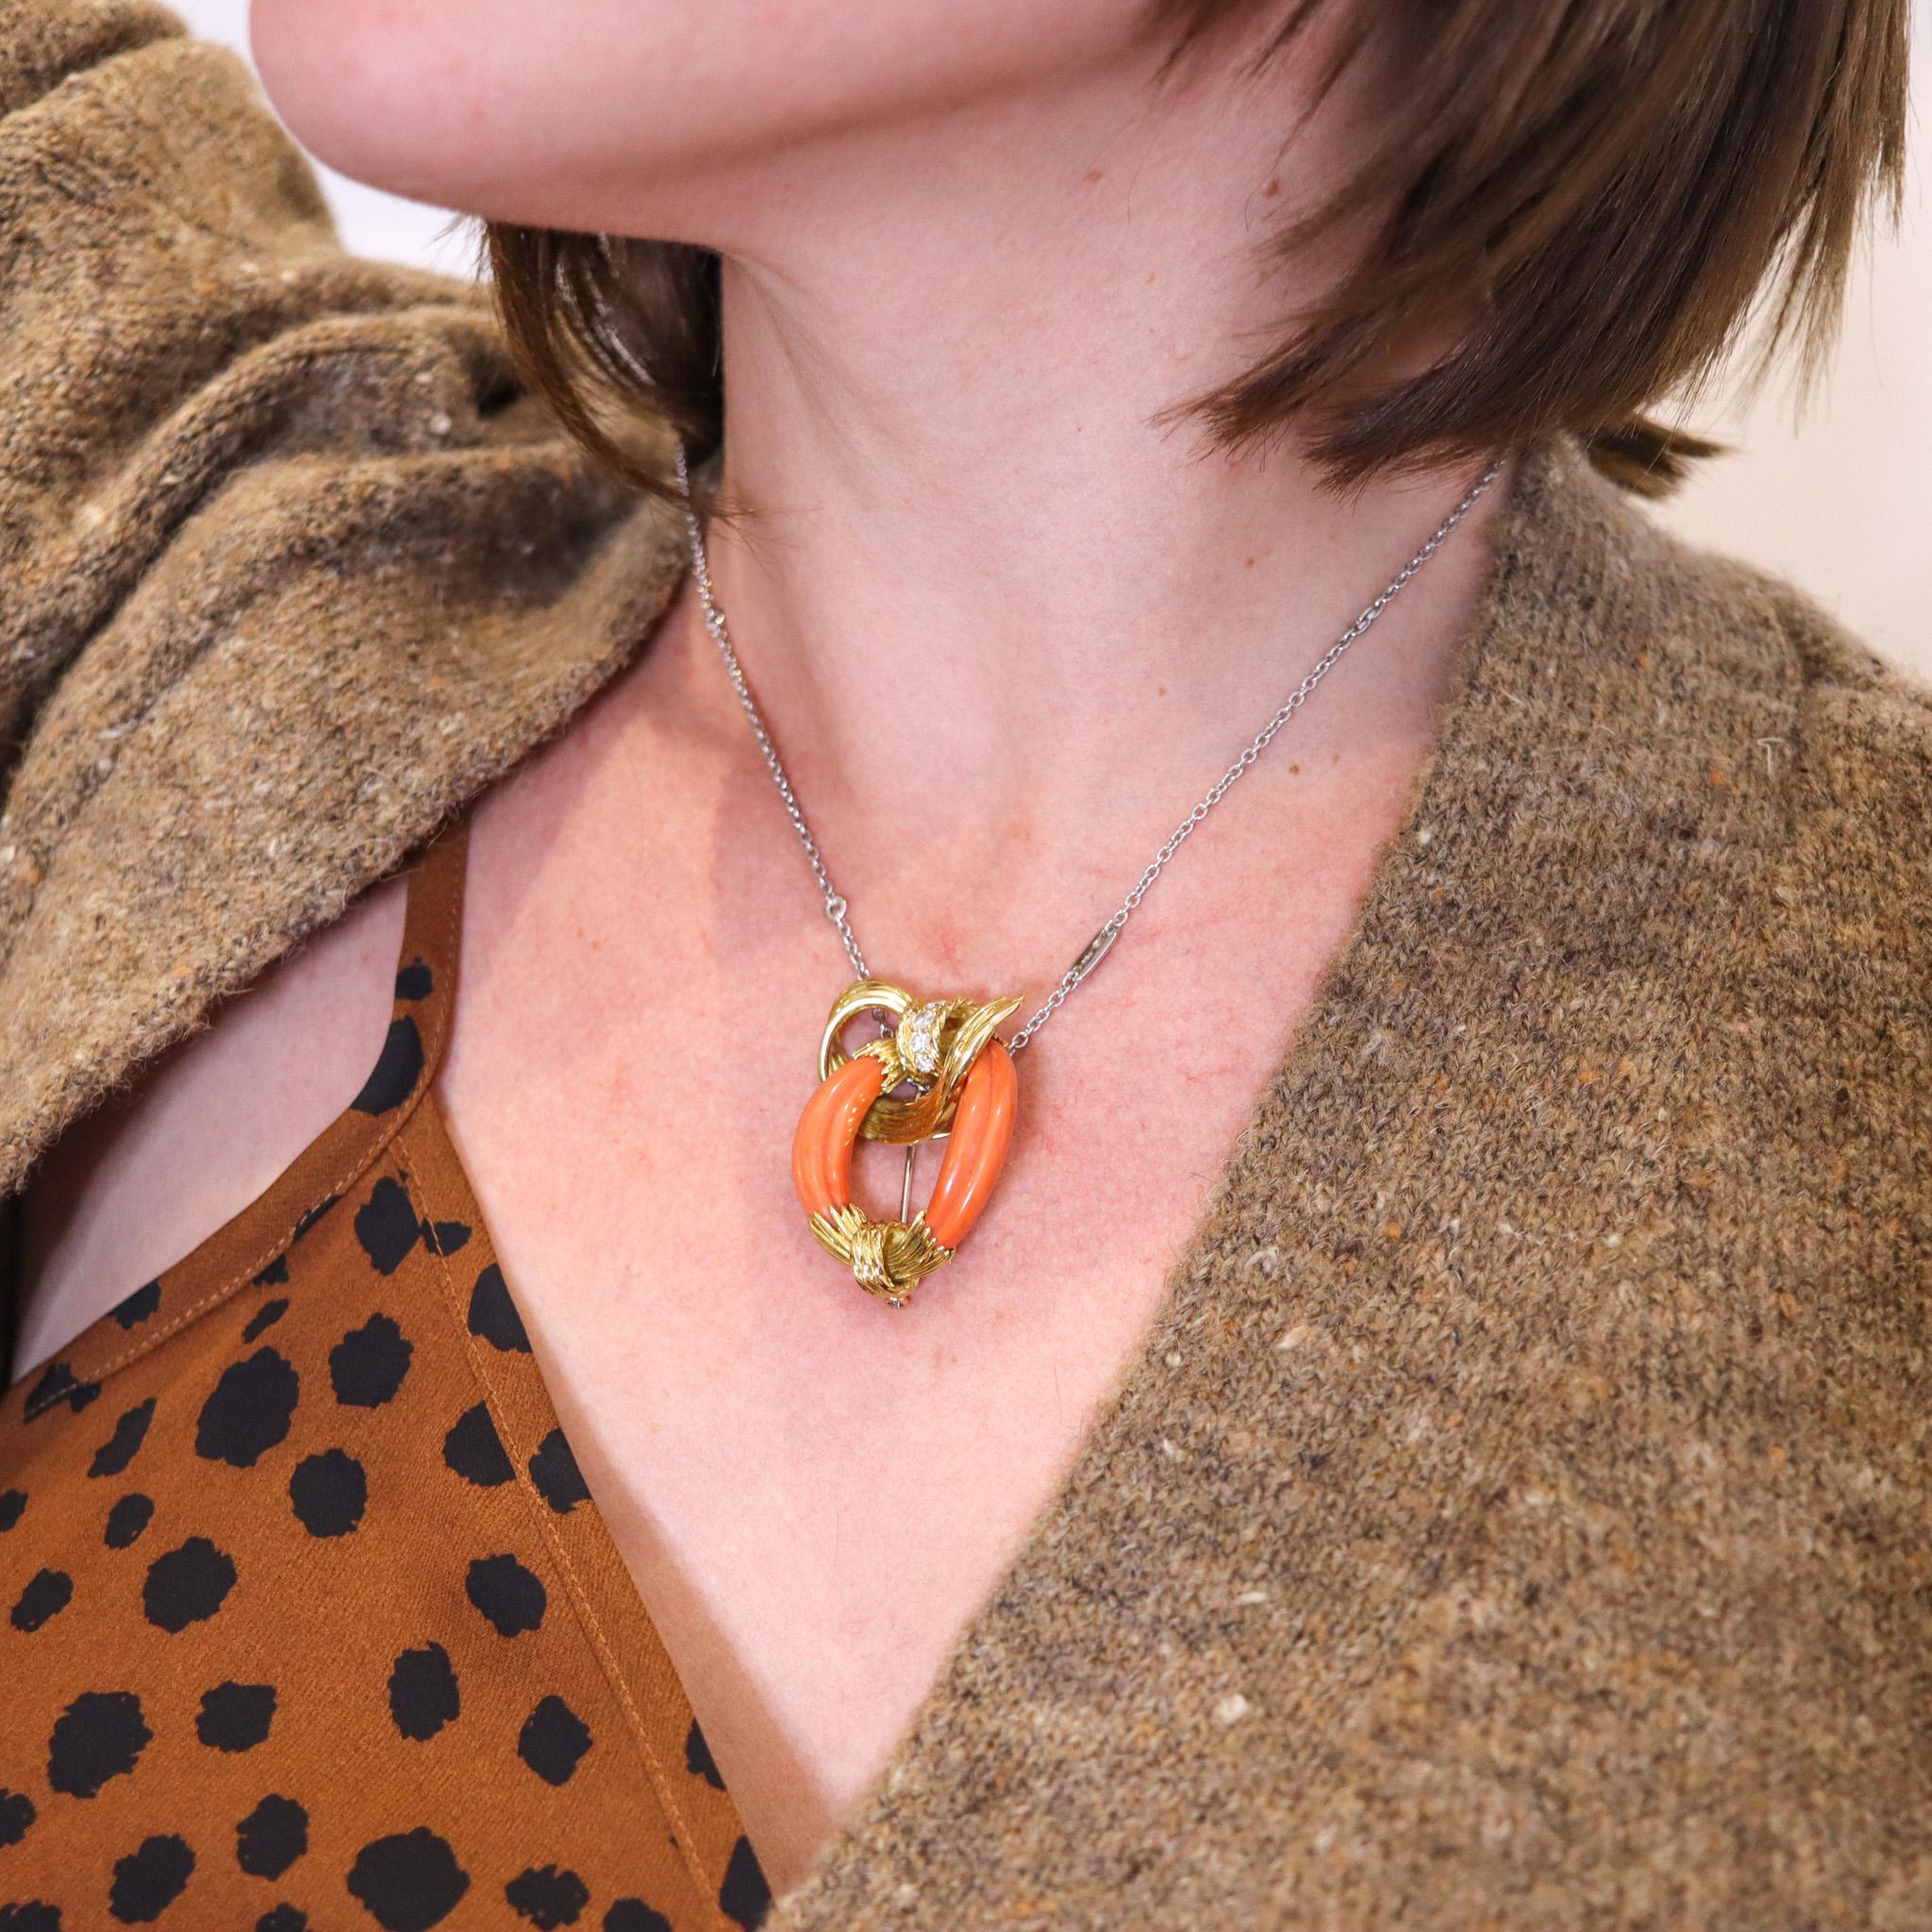 Chaumet Paris 1960 Modernist Pendant Brooch In 18Kt Gold With Coral And Diamonds For Sale 3